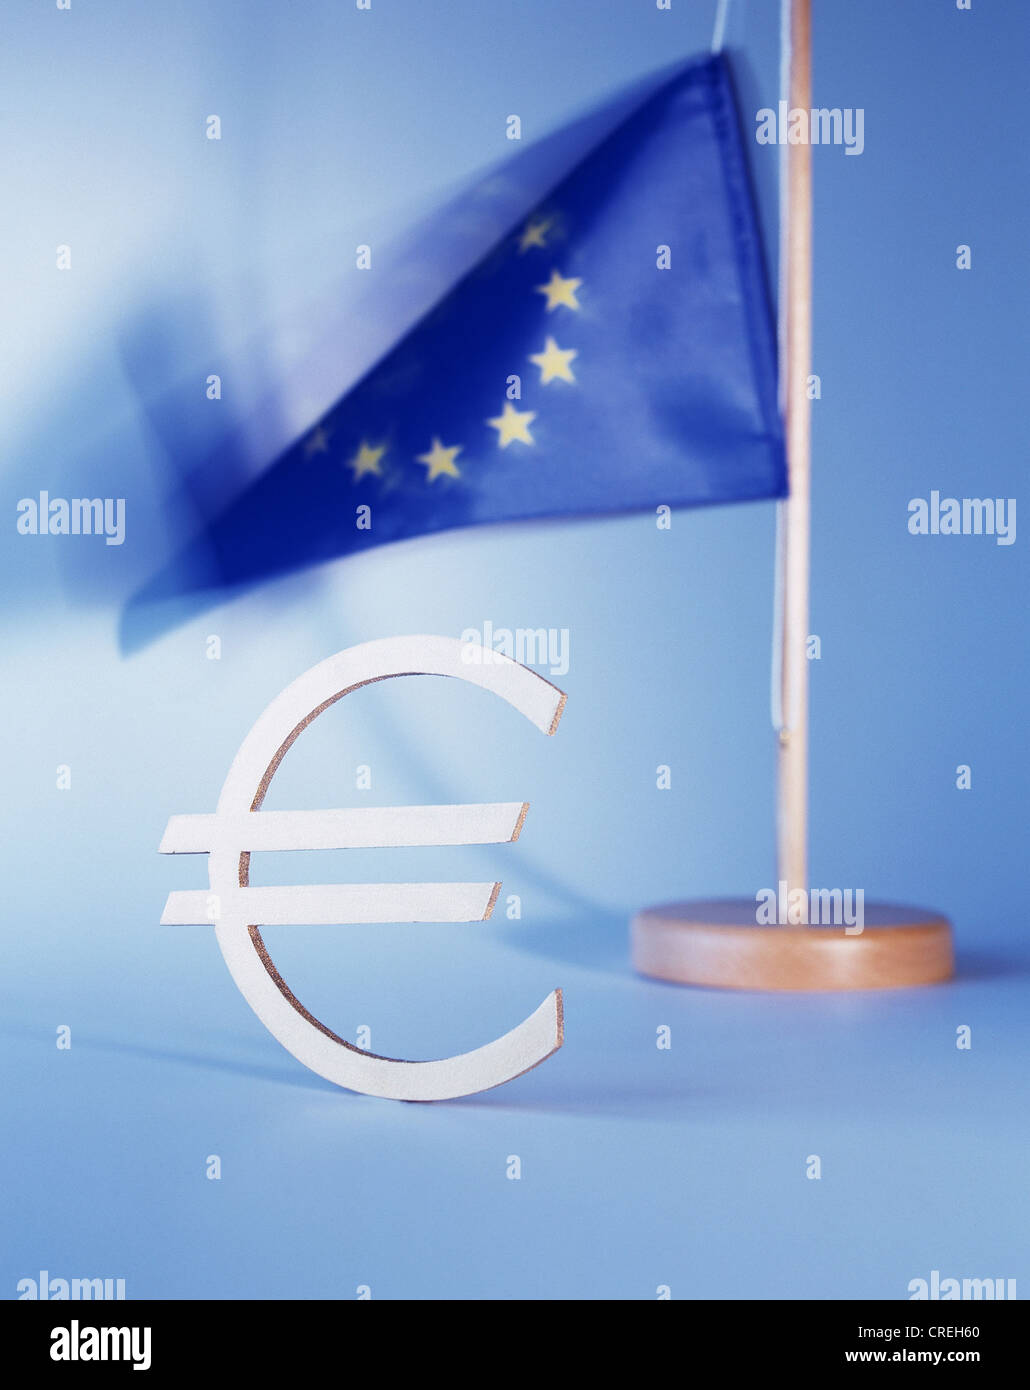 The euro sign standing in front of an EU flag Stock Photo